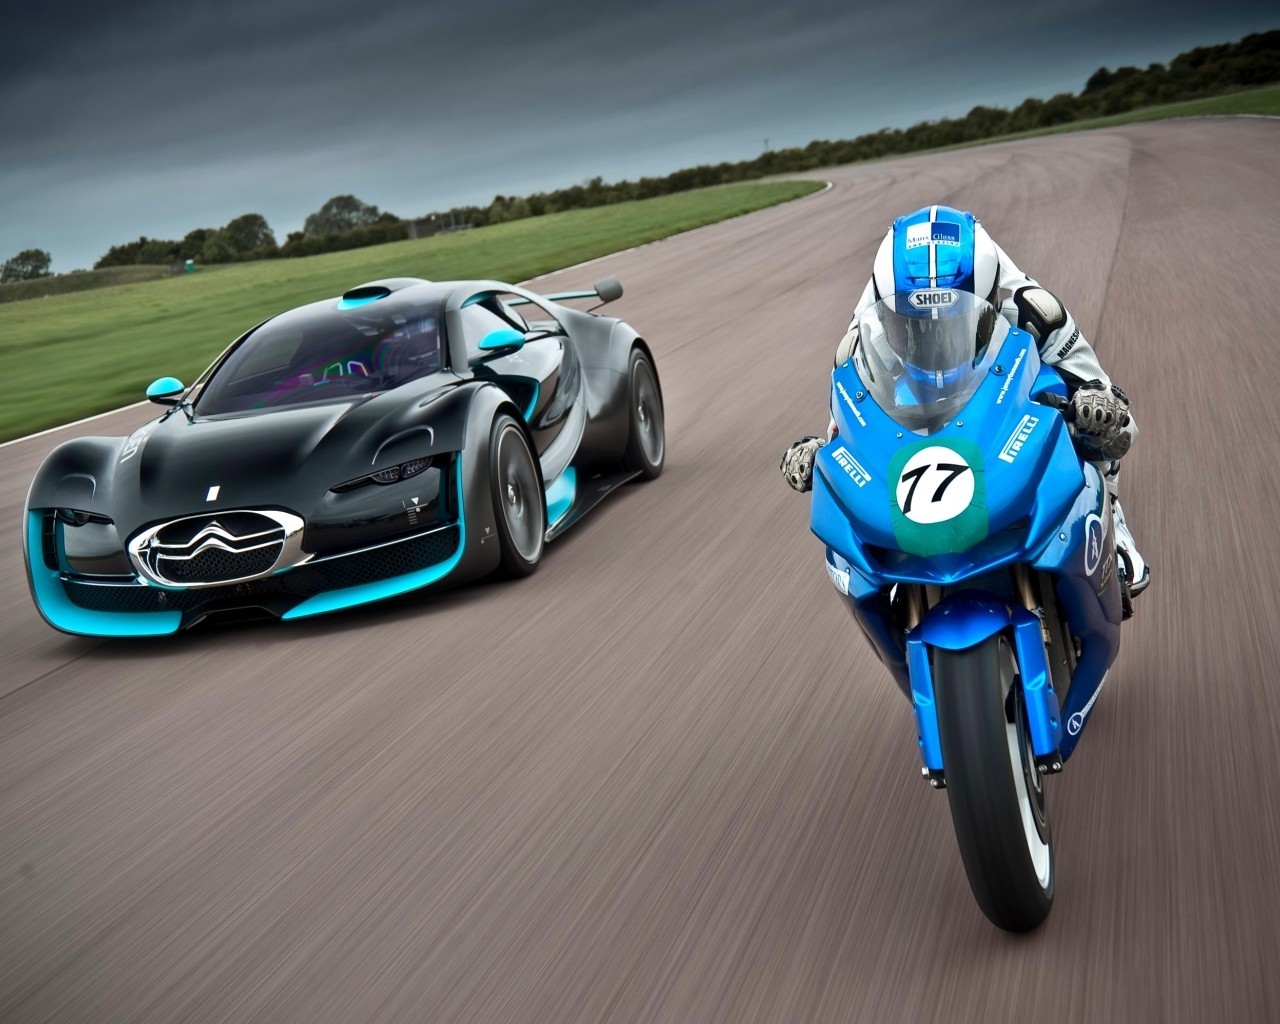 Citroen and Moto Race for 1280 x 1024 resolution